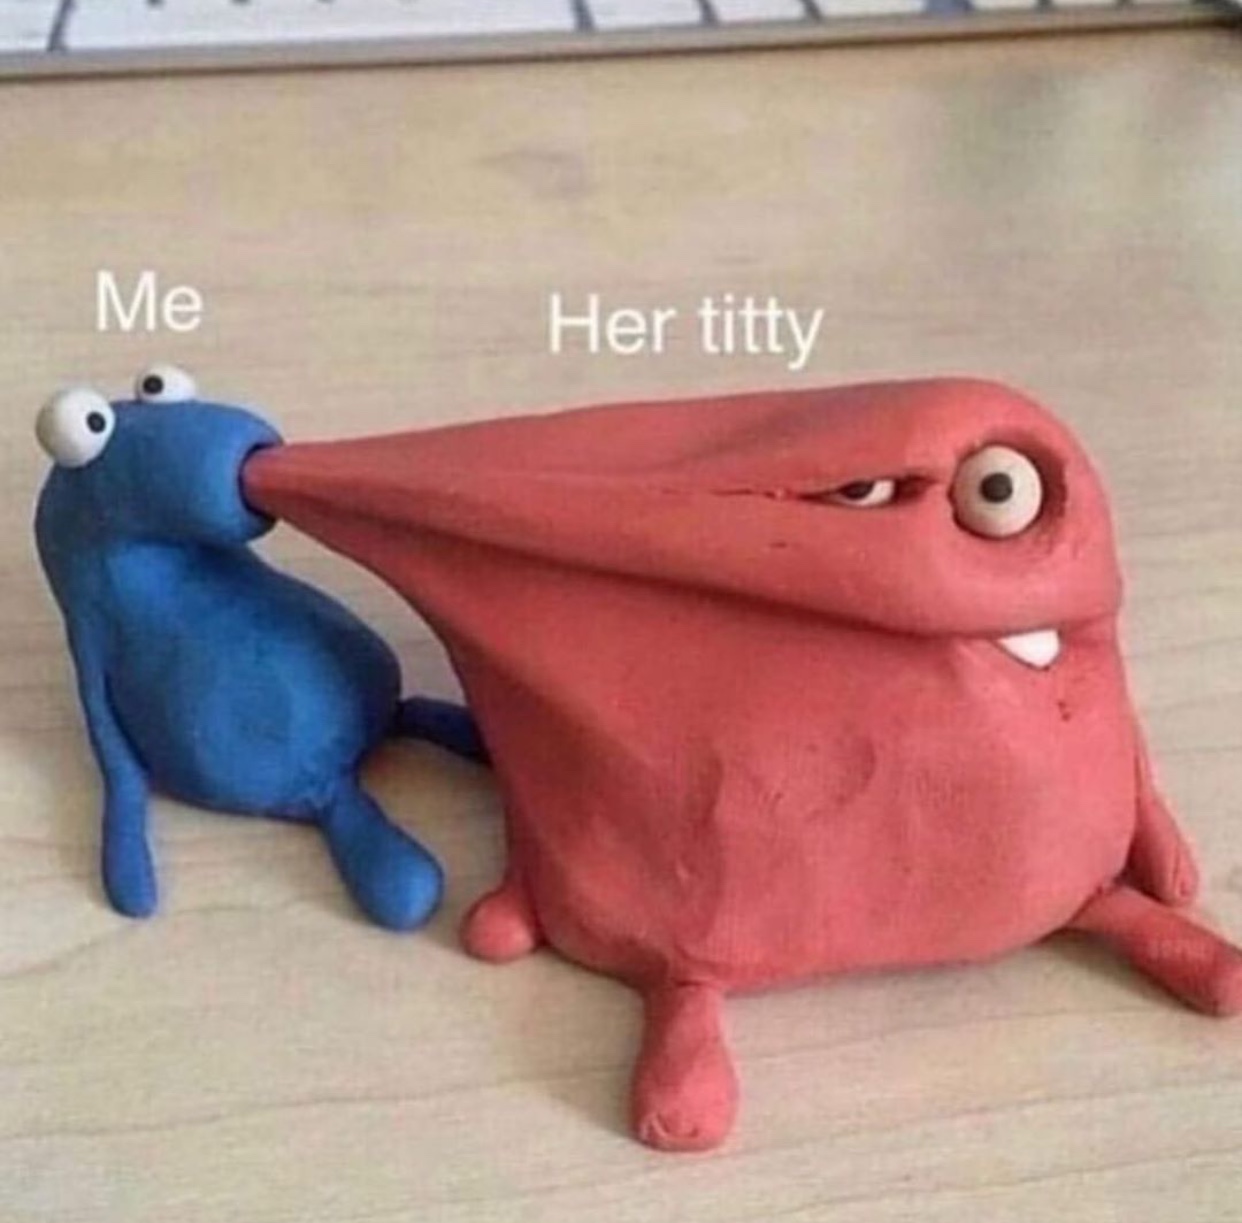 me her titty meme - Me Her titty